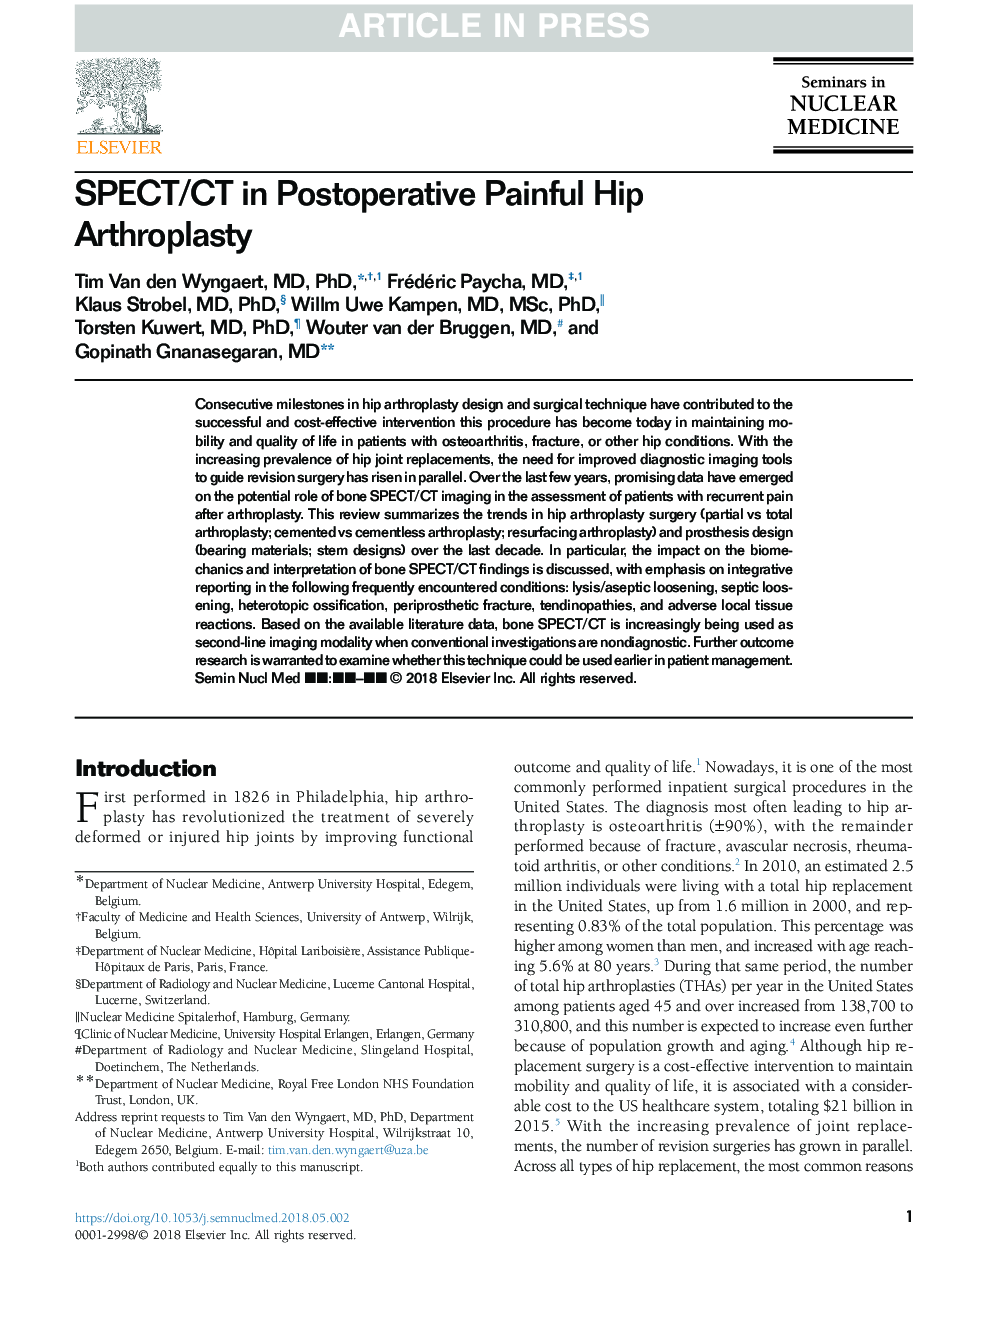 SPECT/CT in Postoperative Painful Hip Arthroplasty